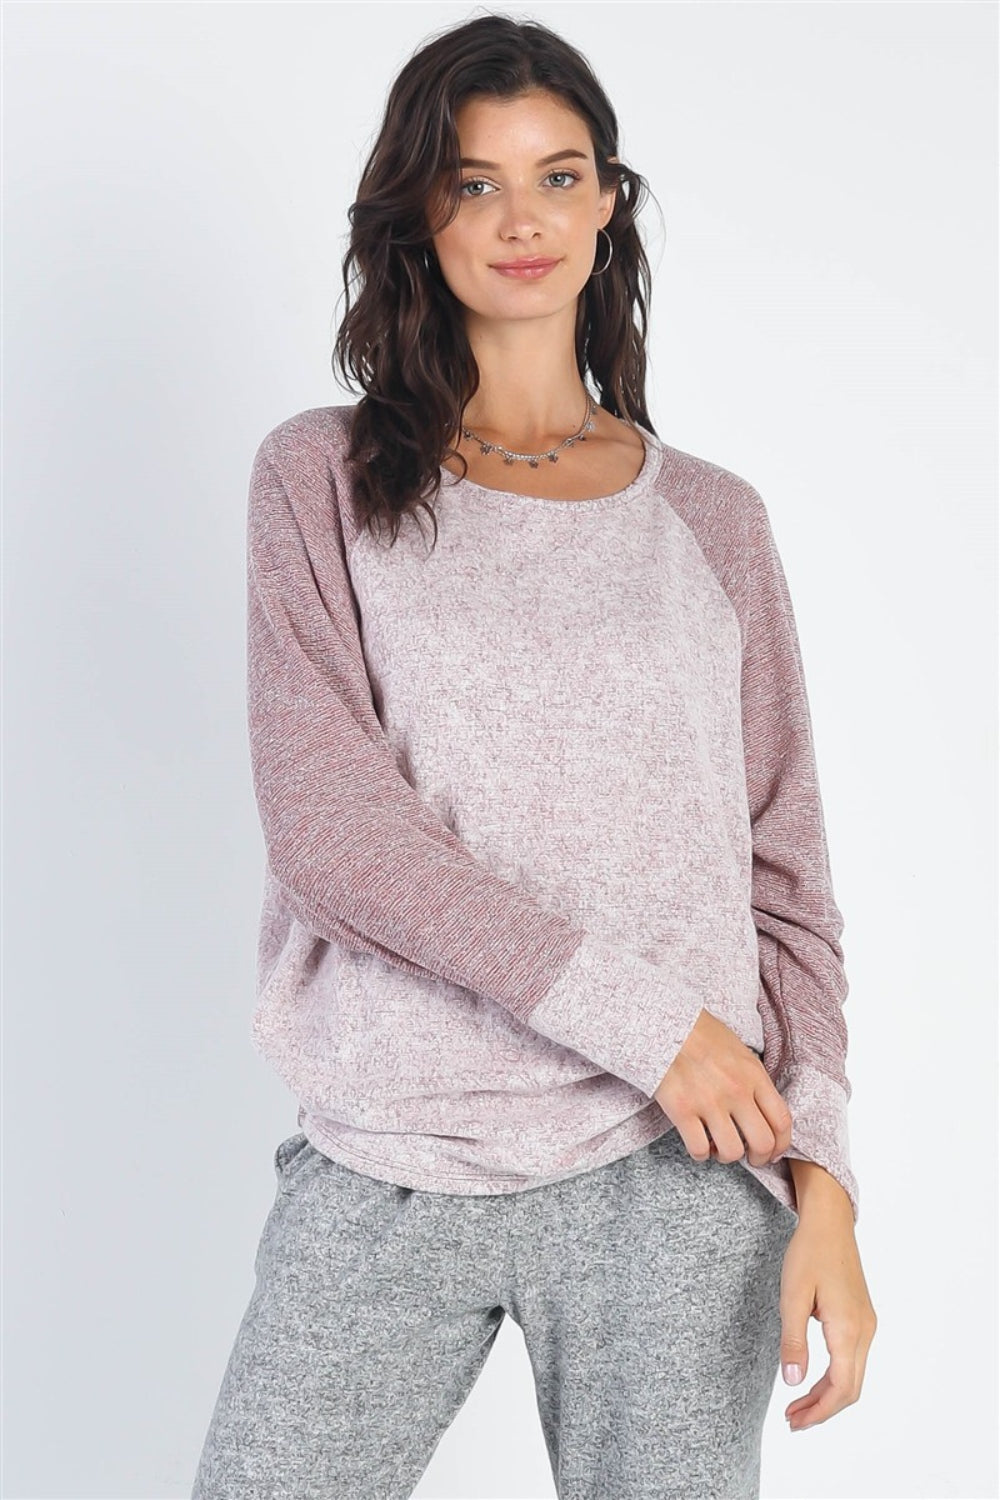 Cherish Apparel Women's Round Neck Long Sleeve Contrast Top - Elegant Casual Wear for All Occasions, Available in Multiple Colors